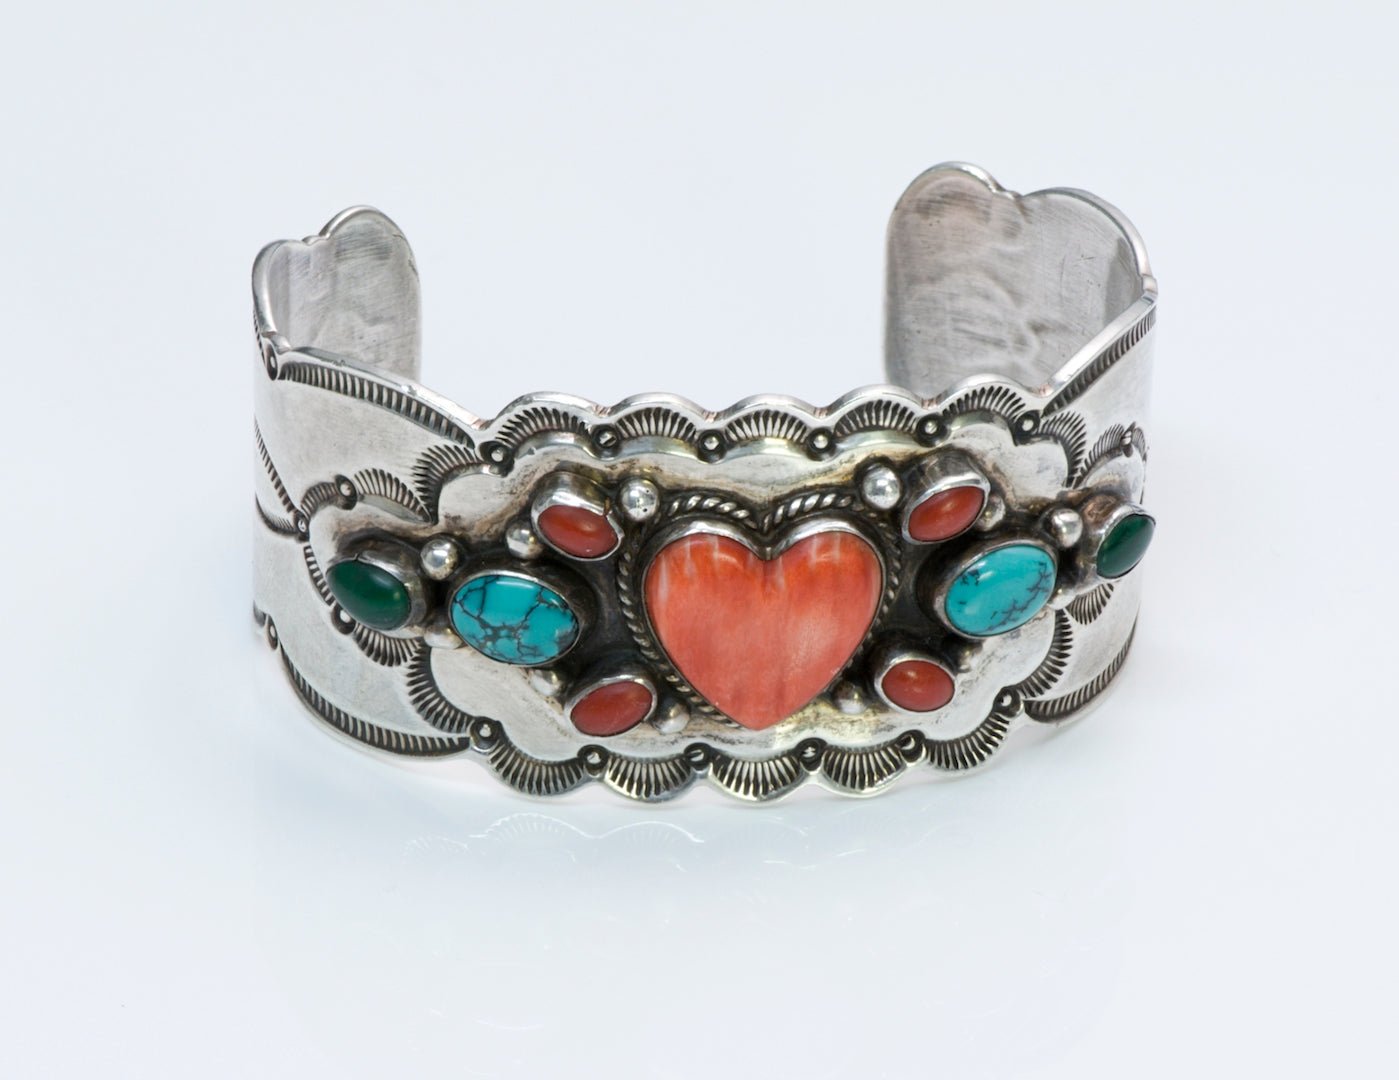 American Indian Coral Cuff Bracelet - DSF Antique Jewelry